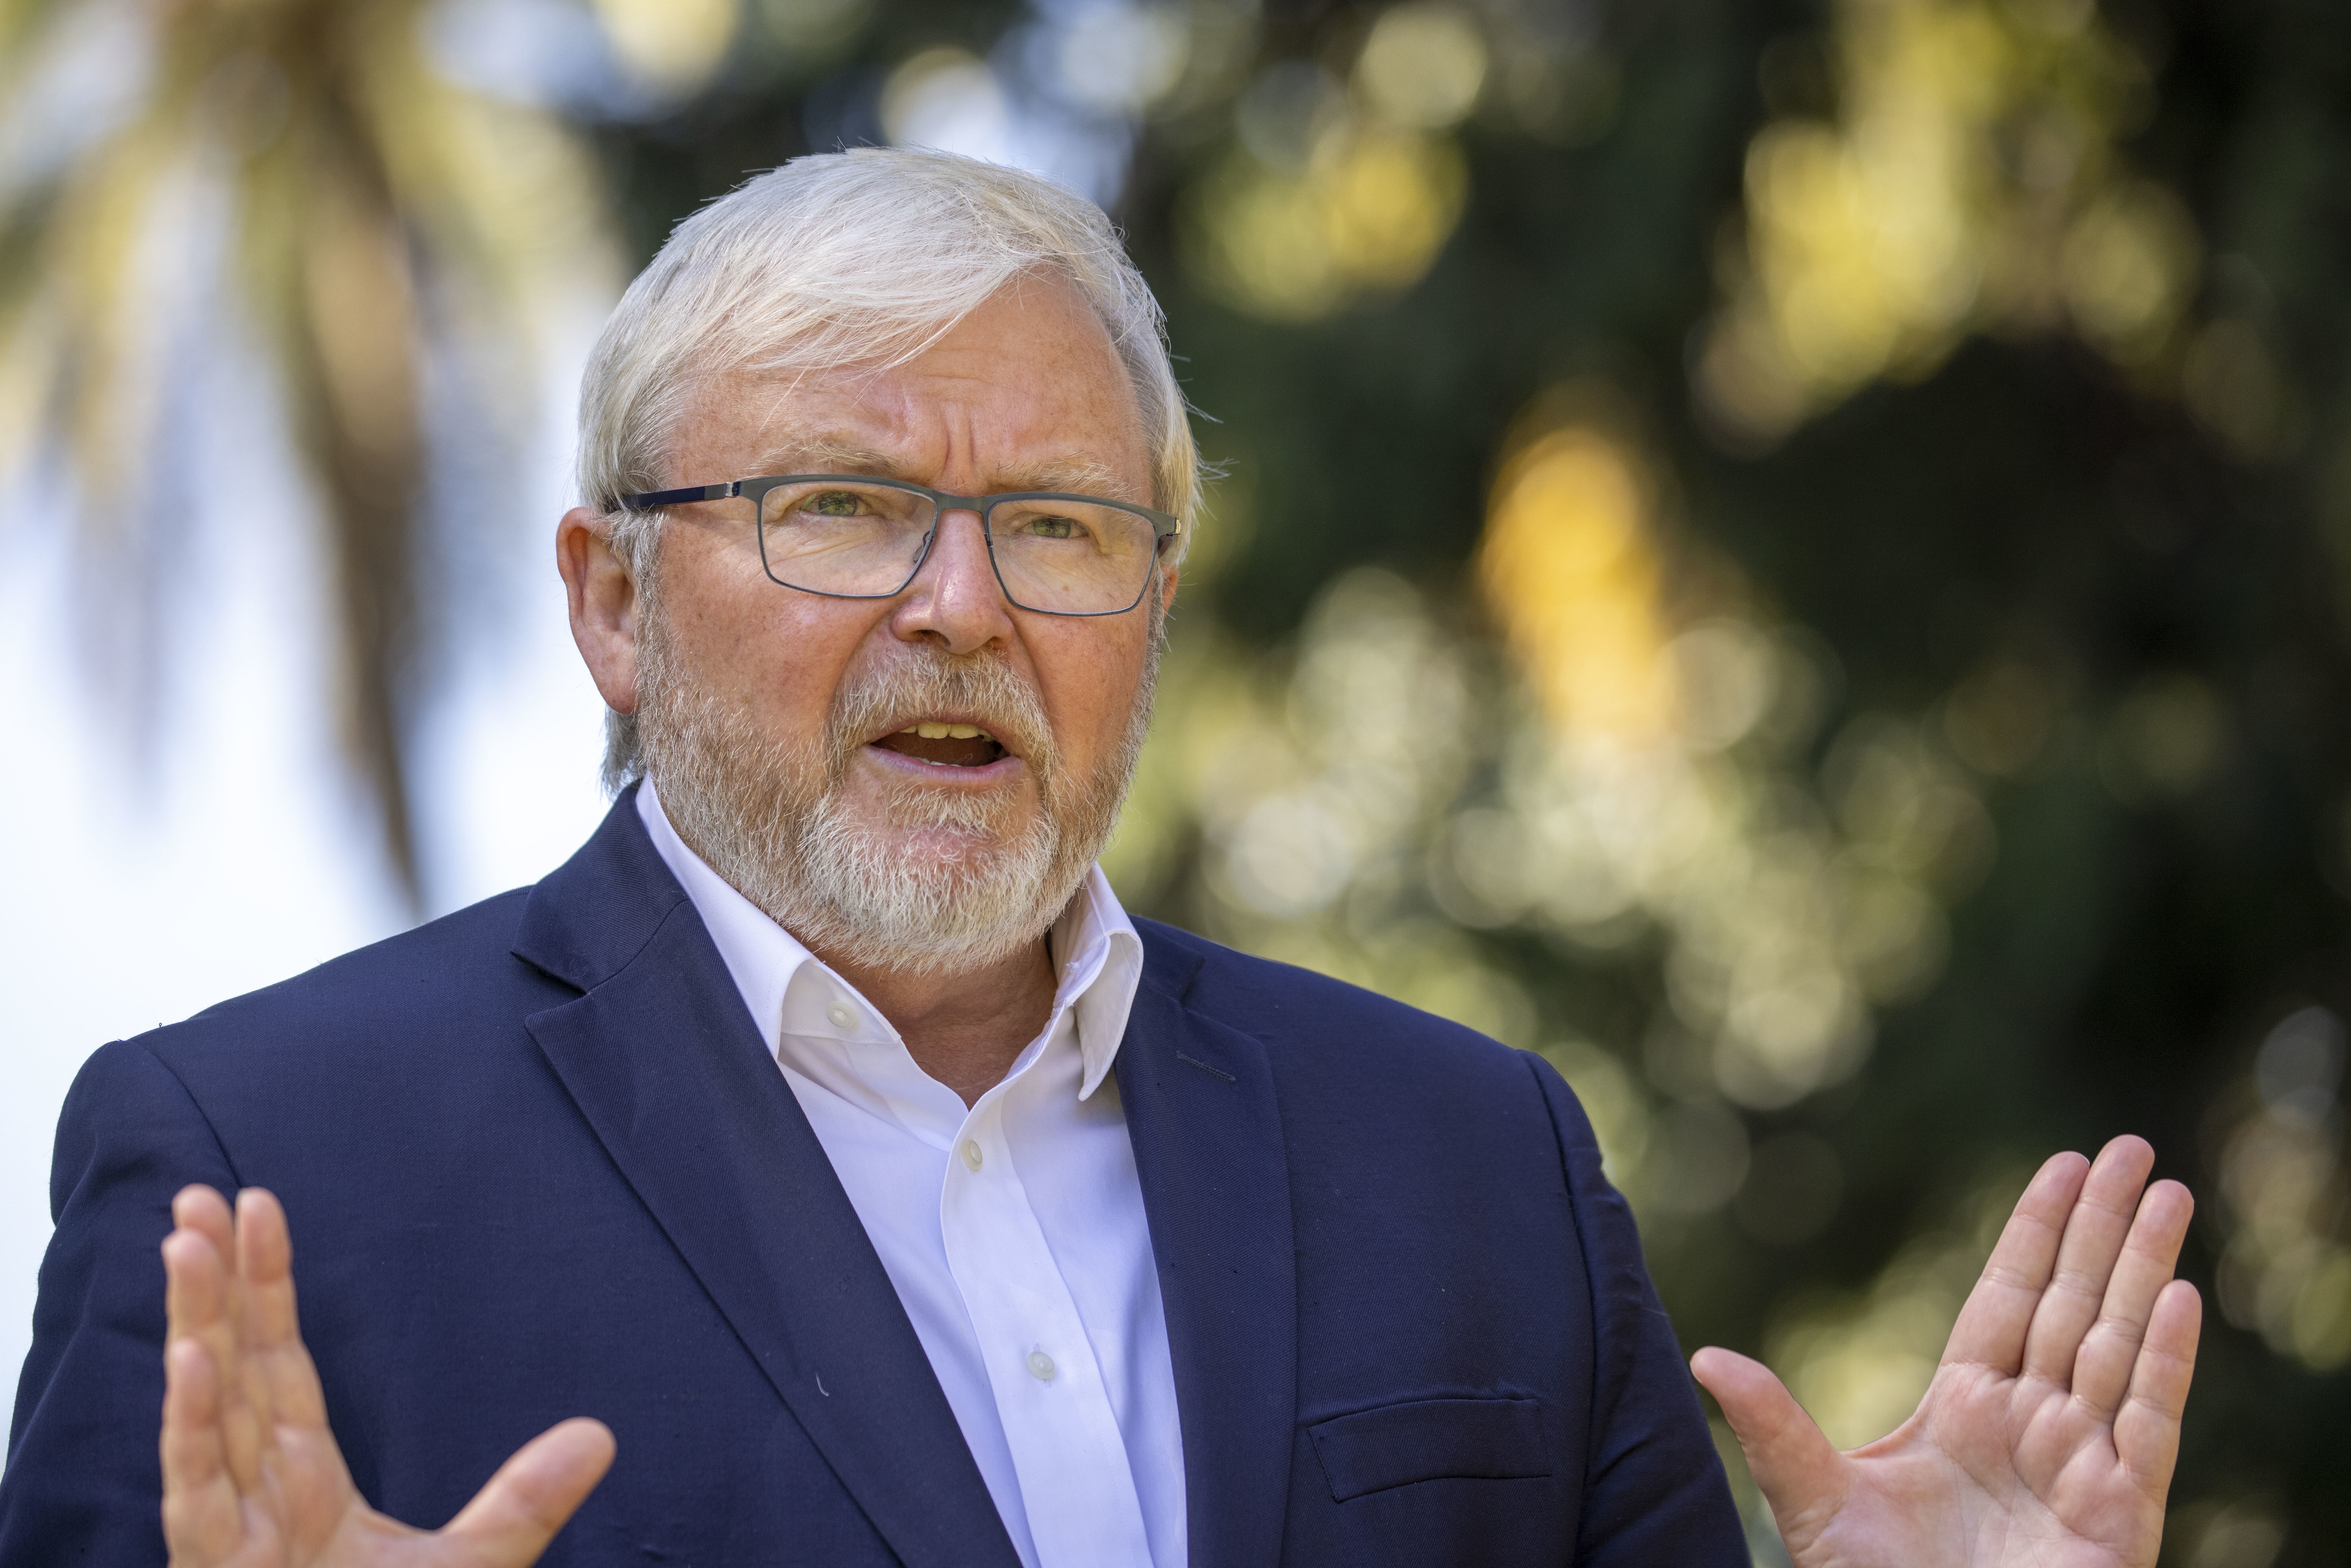 Former Australian prime minister Kevin Rudd views Tokyo’s ability to deal with Beijing as particularly instructive for Canberra. Photo: EPA